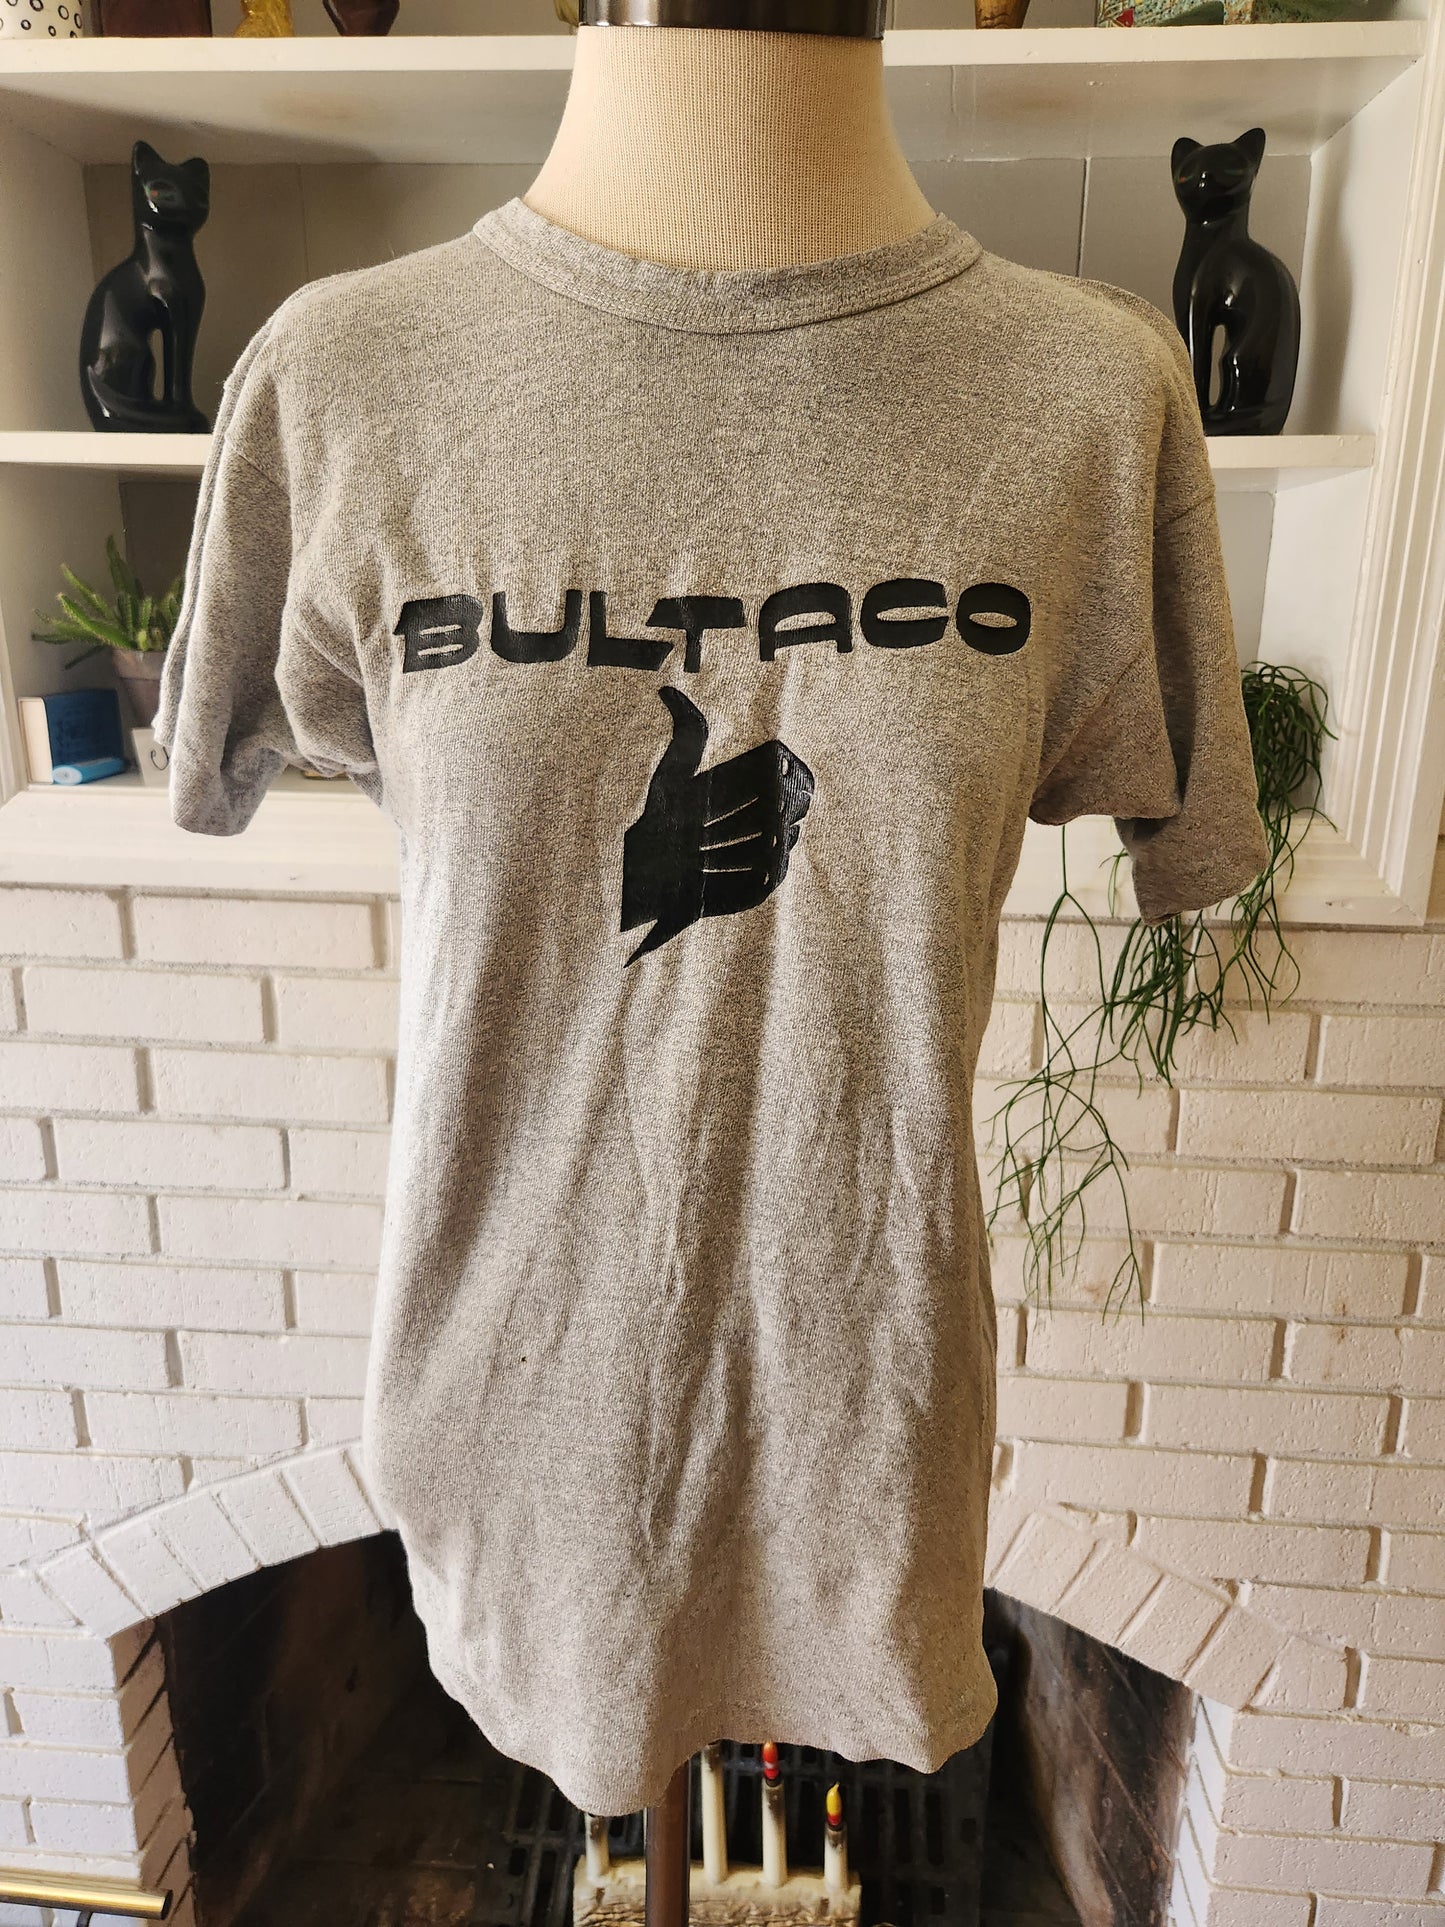 Vintage Gray Bultaco Motorcycle T Shirt by Champion